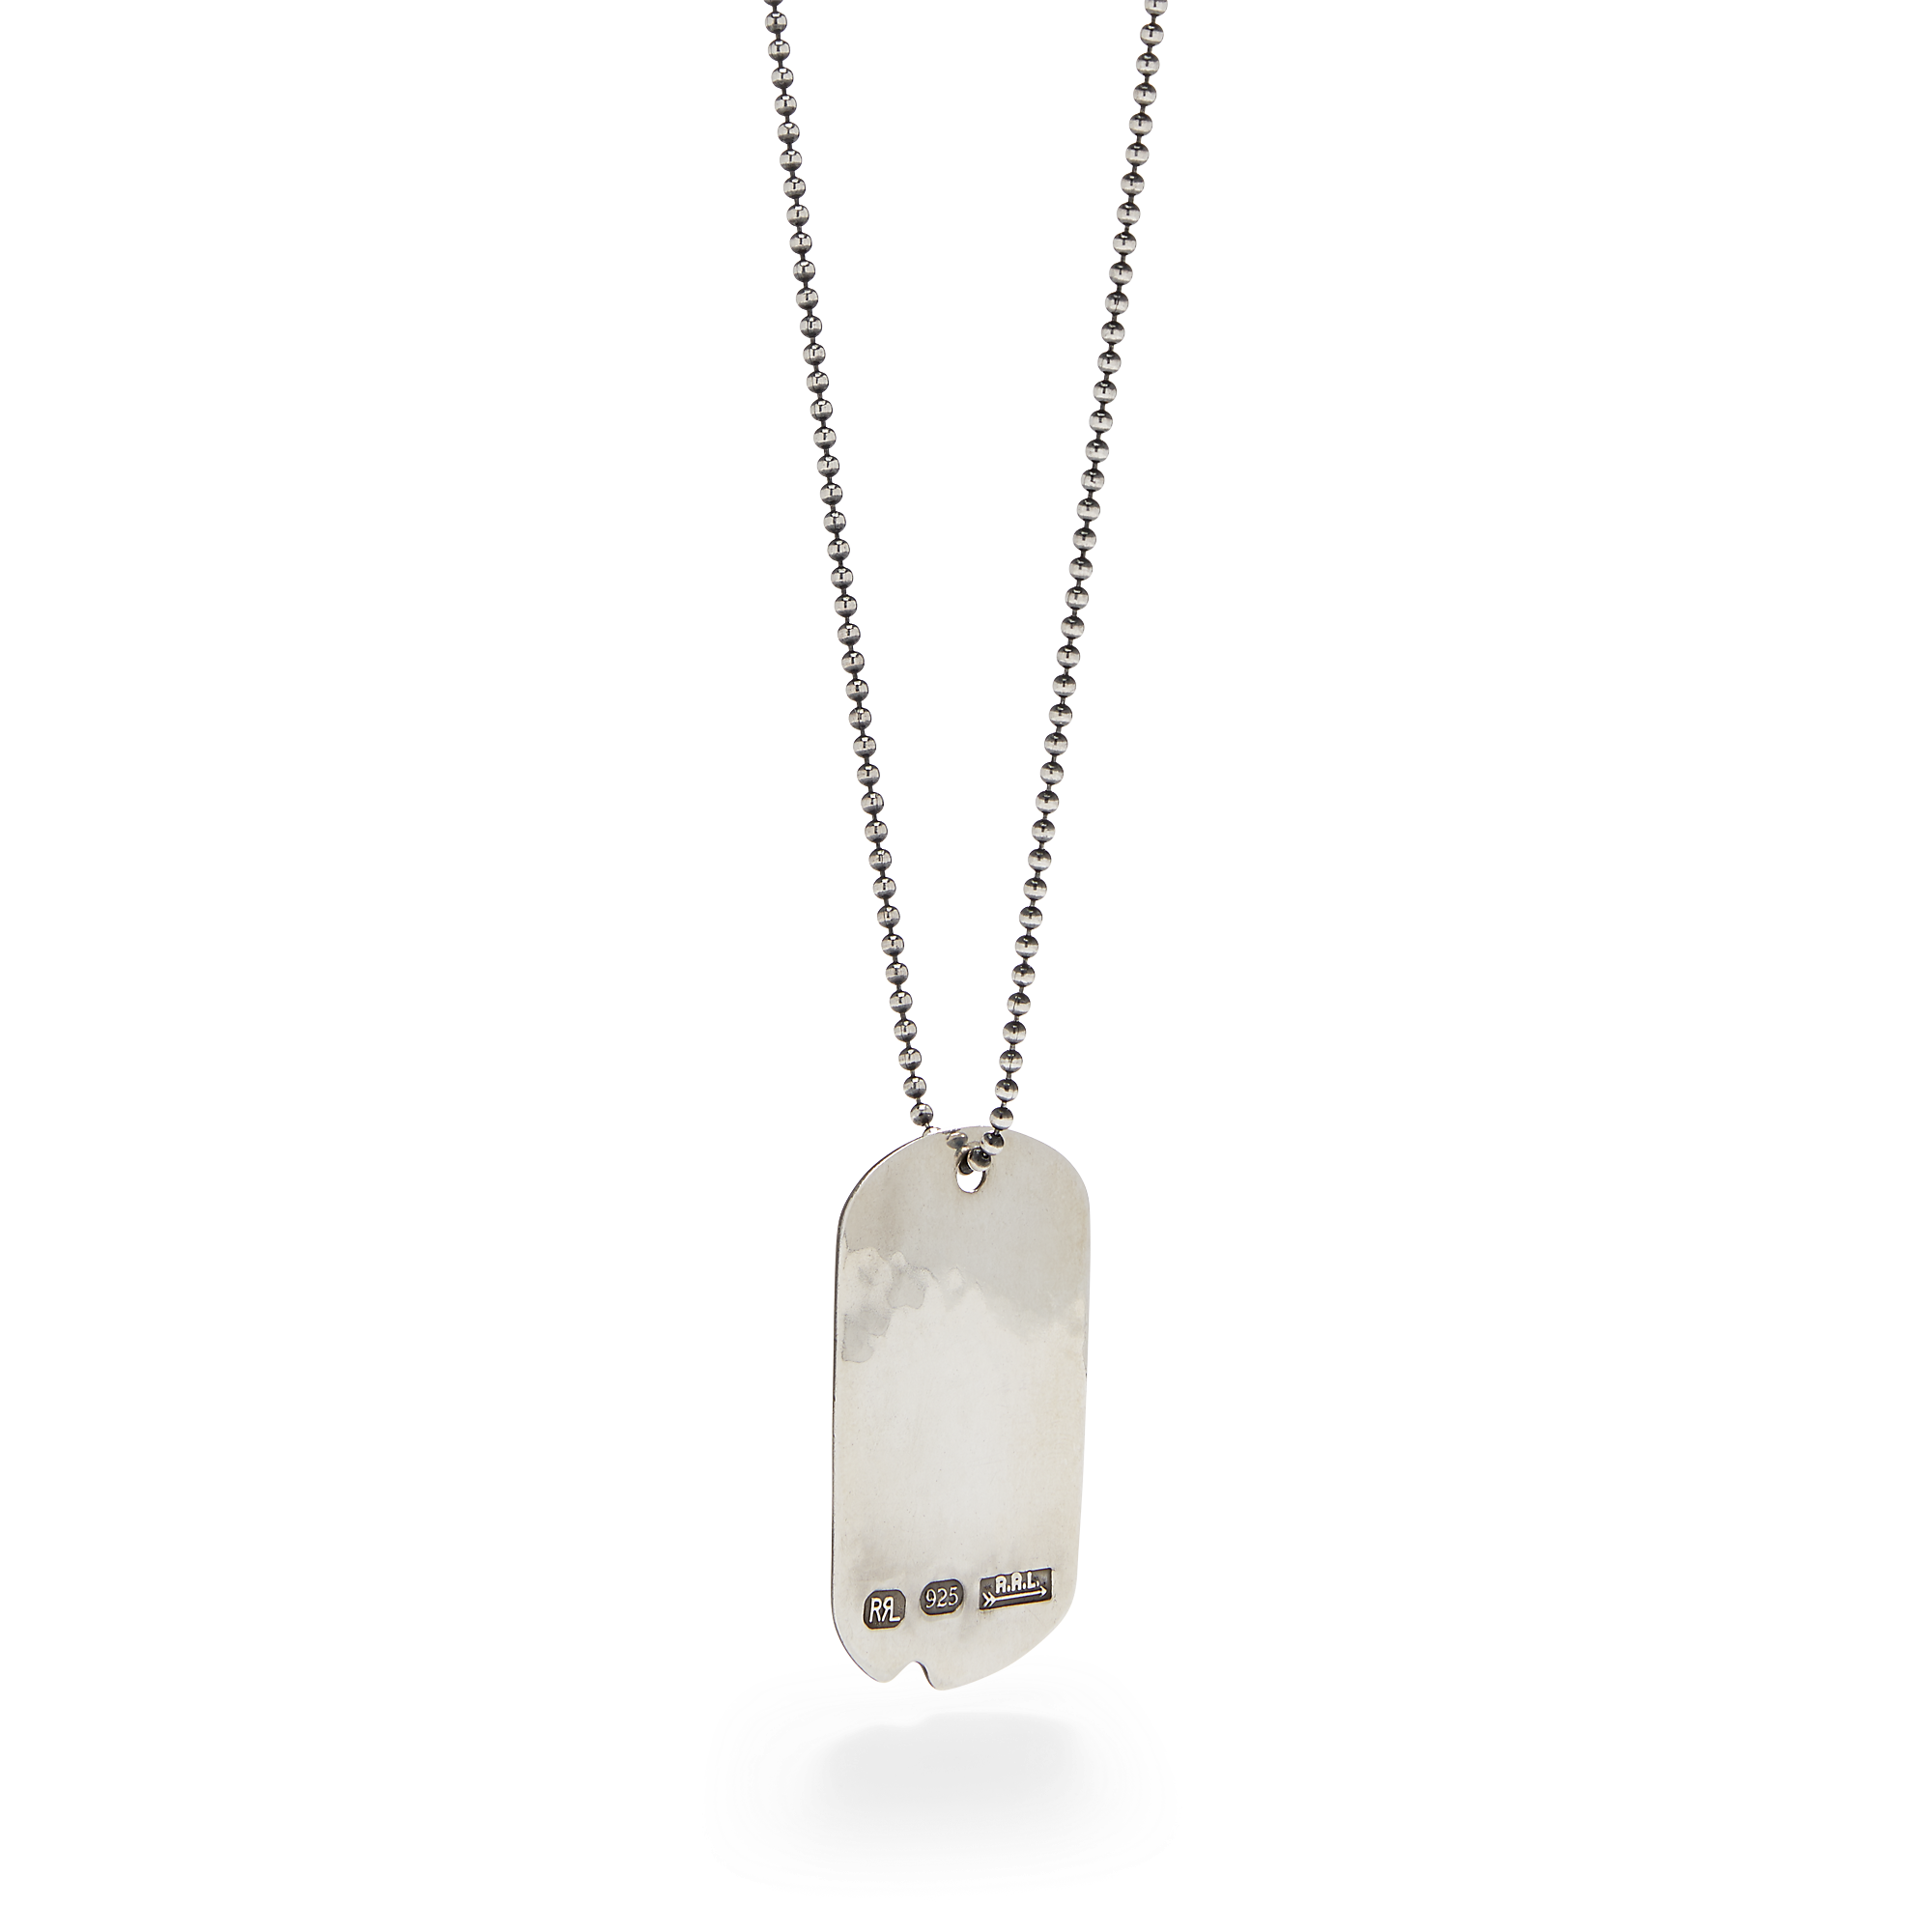 Gucci dogtag necklace. I would love one of these. | Kolye